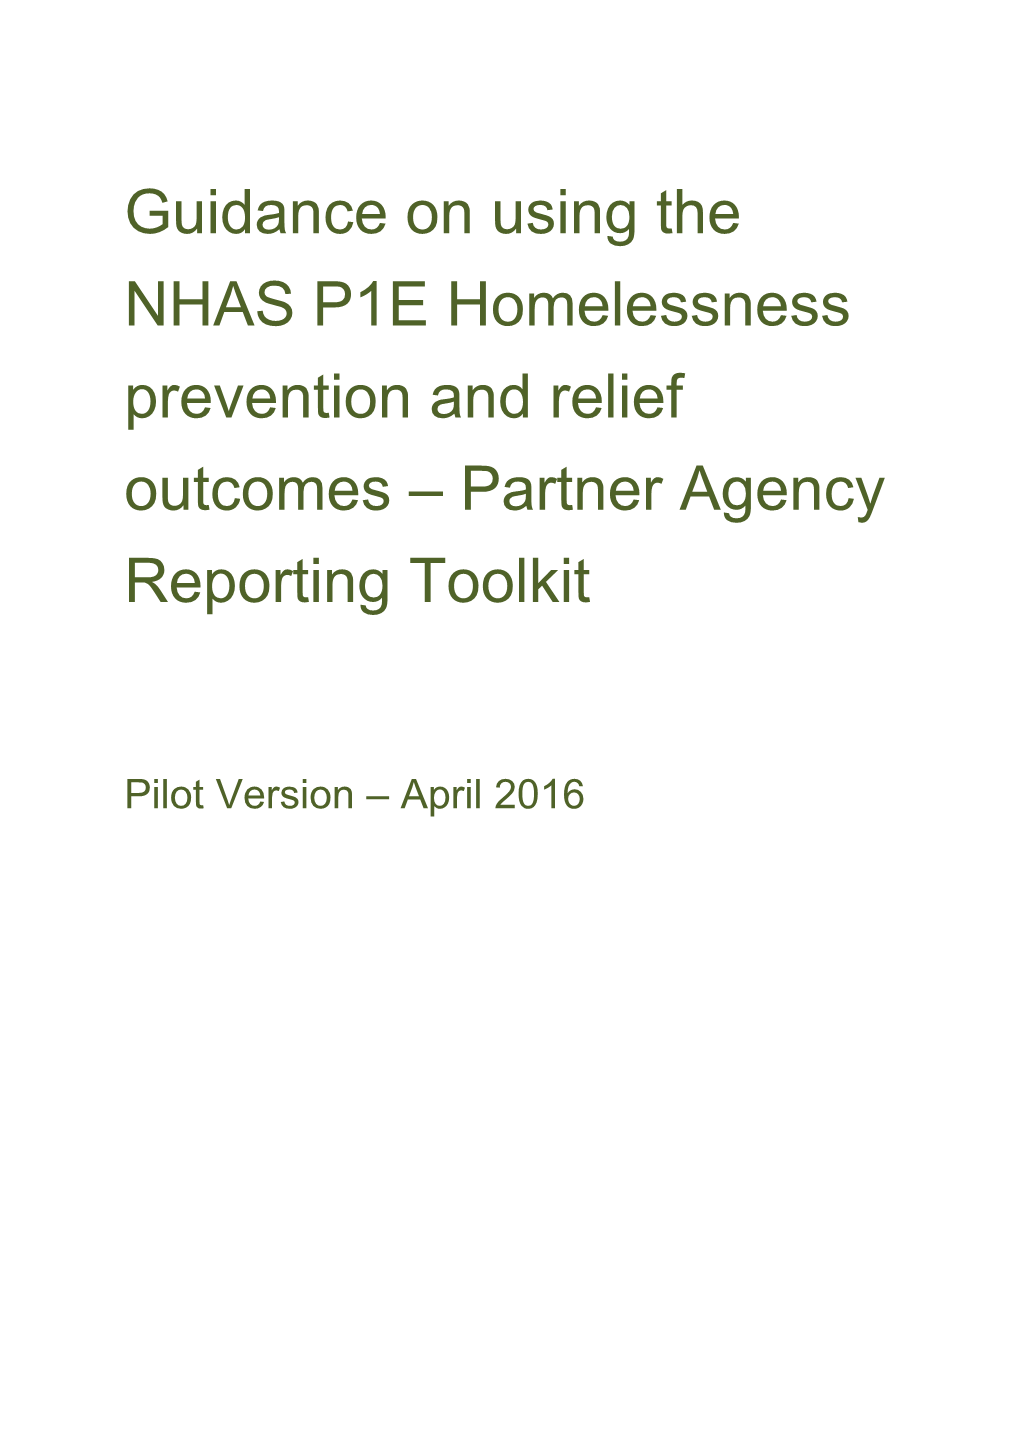 1.0 What Are P1es in Relation to Homelessness Prevention and Relief?